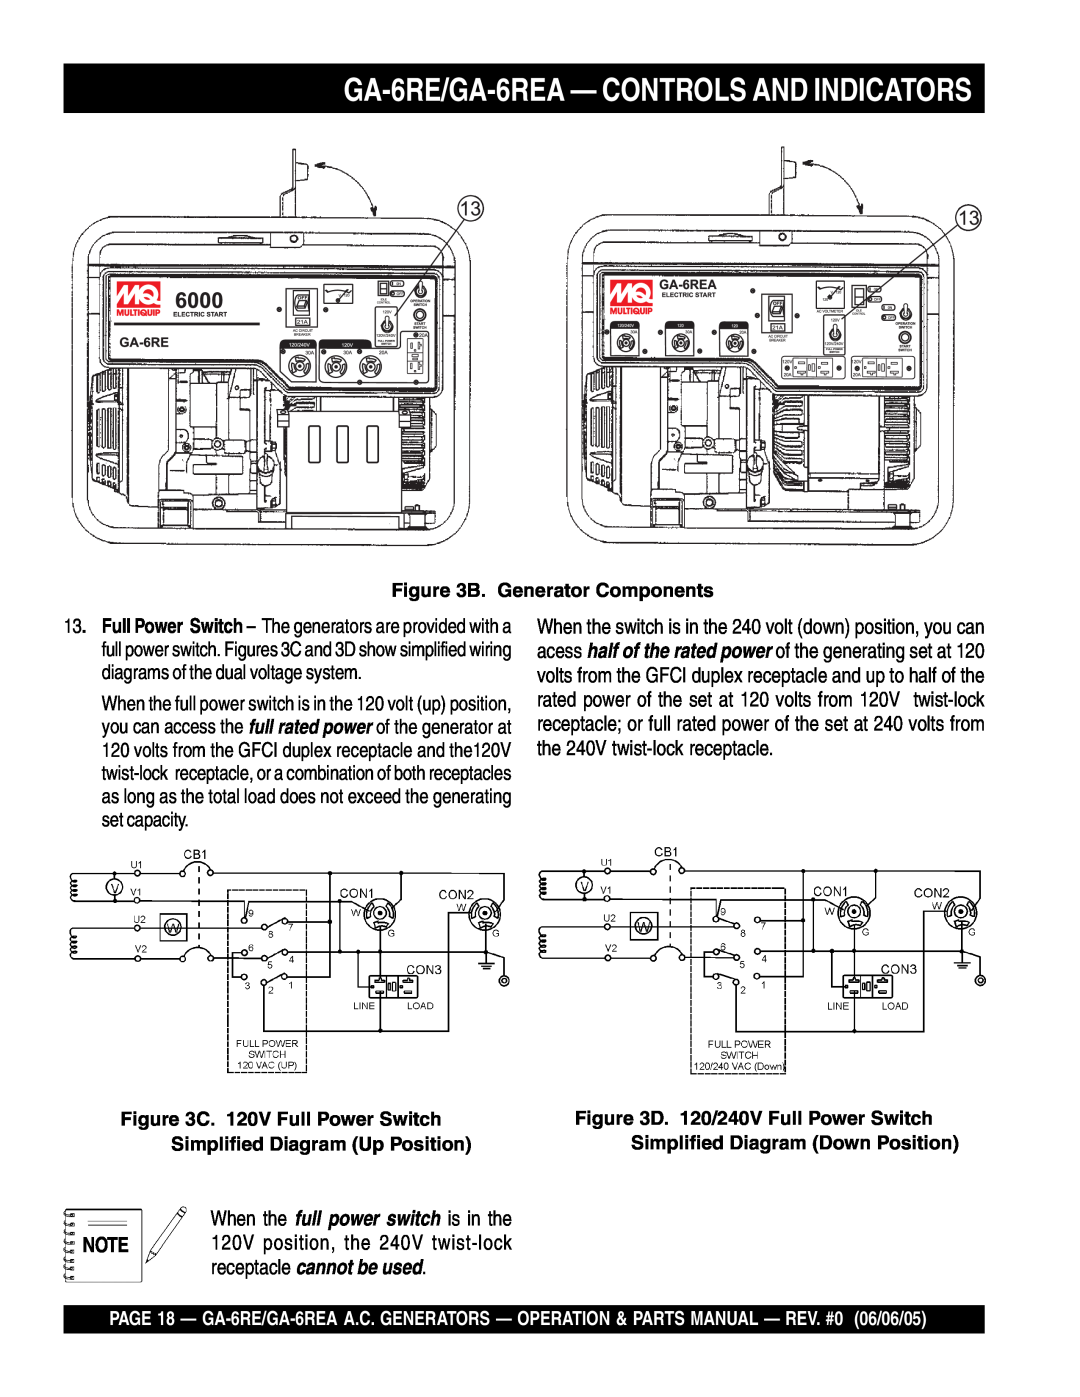 Multiquip manual GA-6RE/GA-6REA- CONTROLS AND INDICATORS, When the full power switch is in the, B. Generator Components 